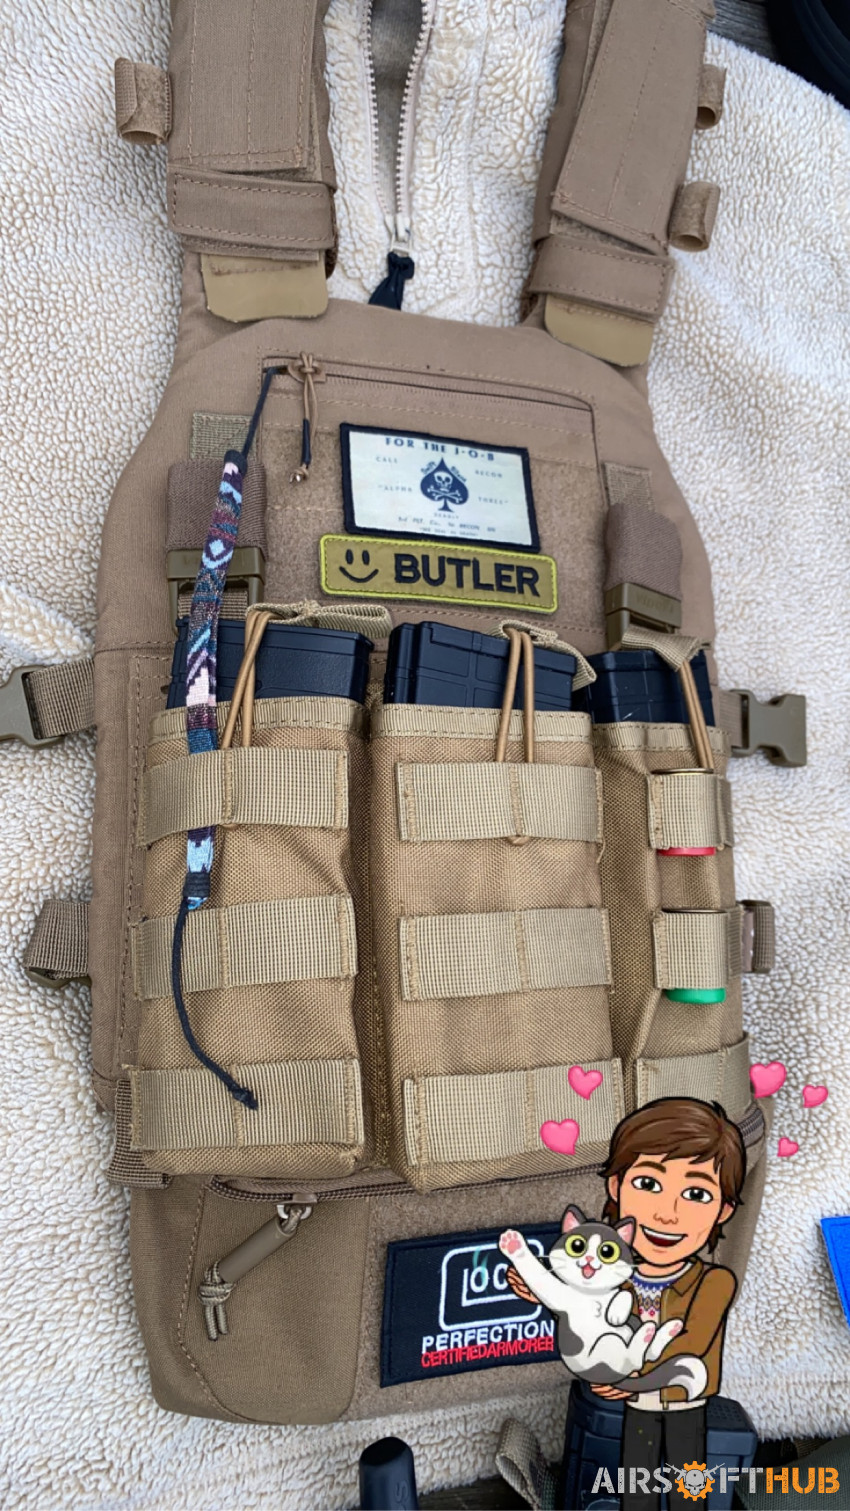 Viper VX plate carrier (tan) - Used airsoft equipment